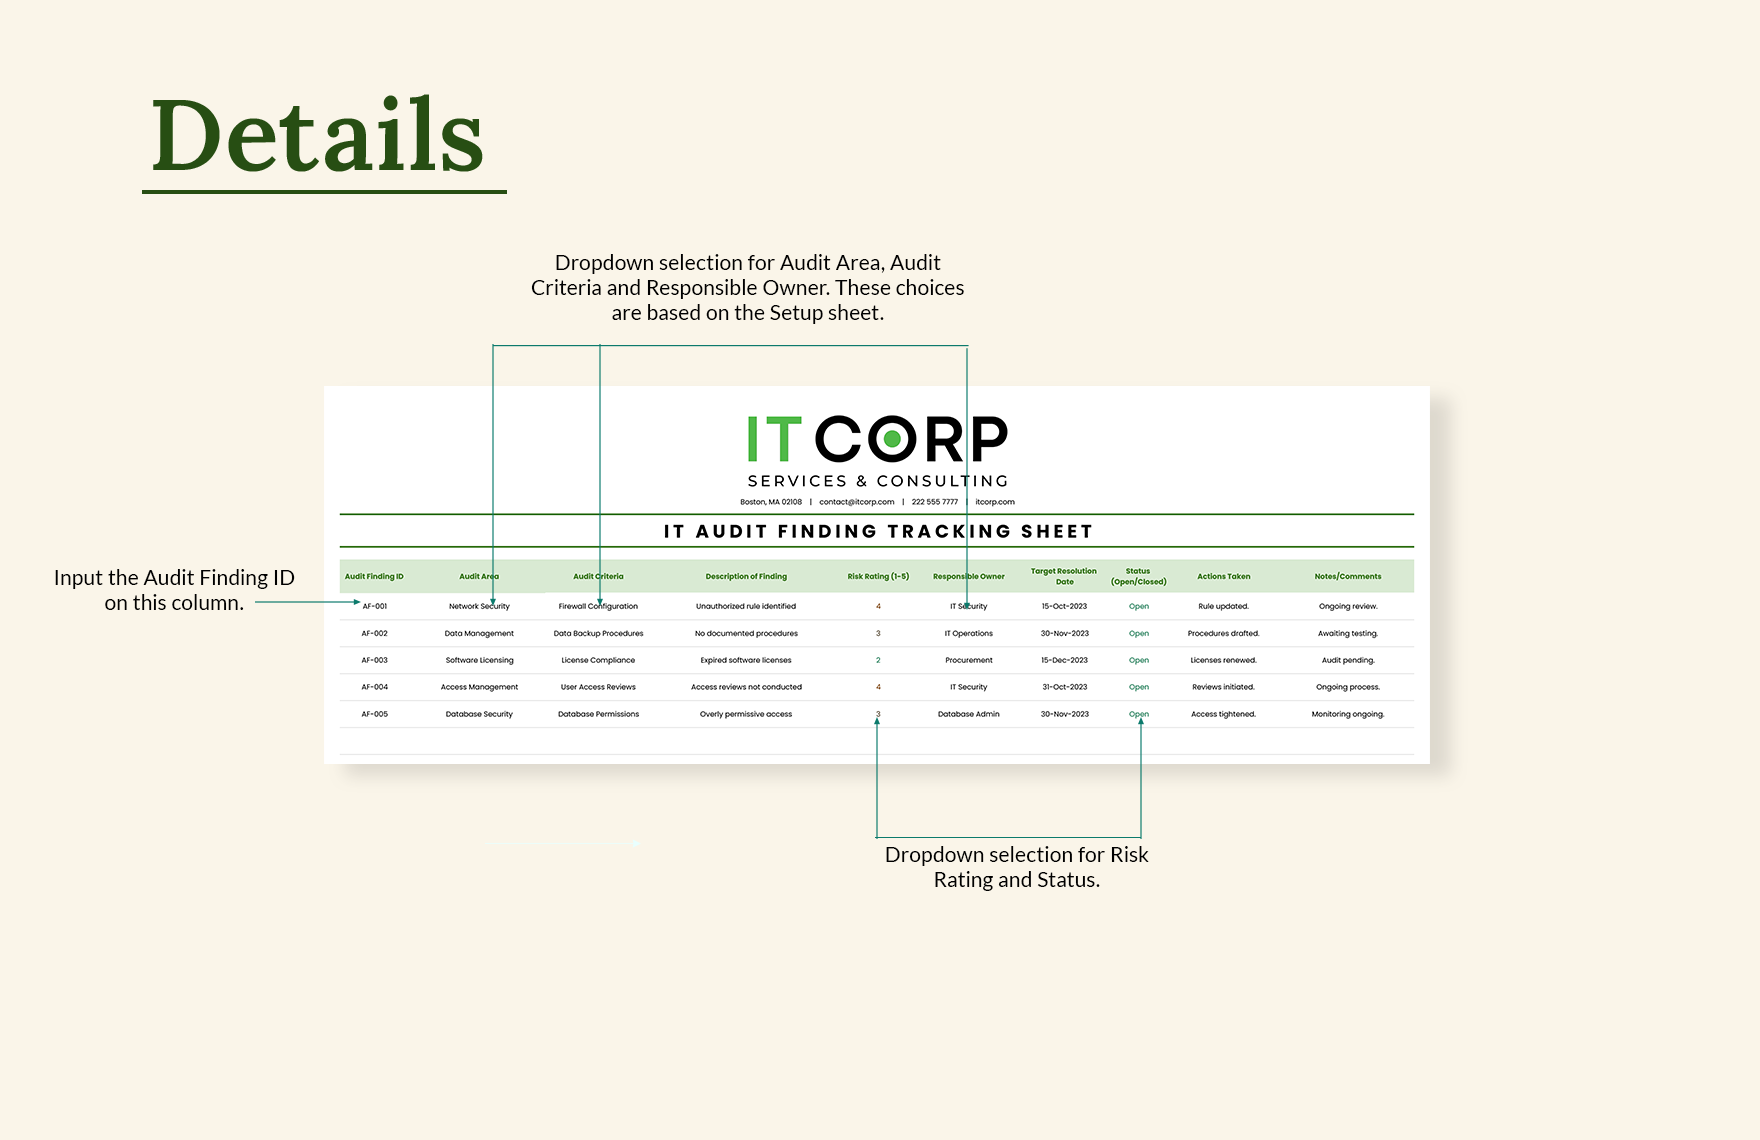 IT Audit Finding Tracking Sheet Template